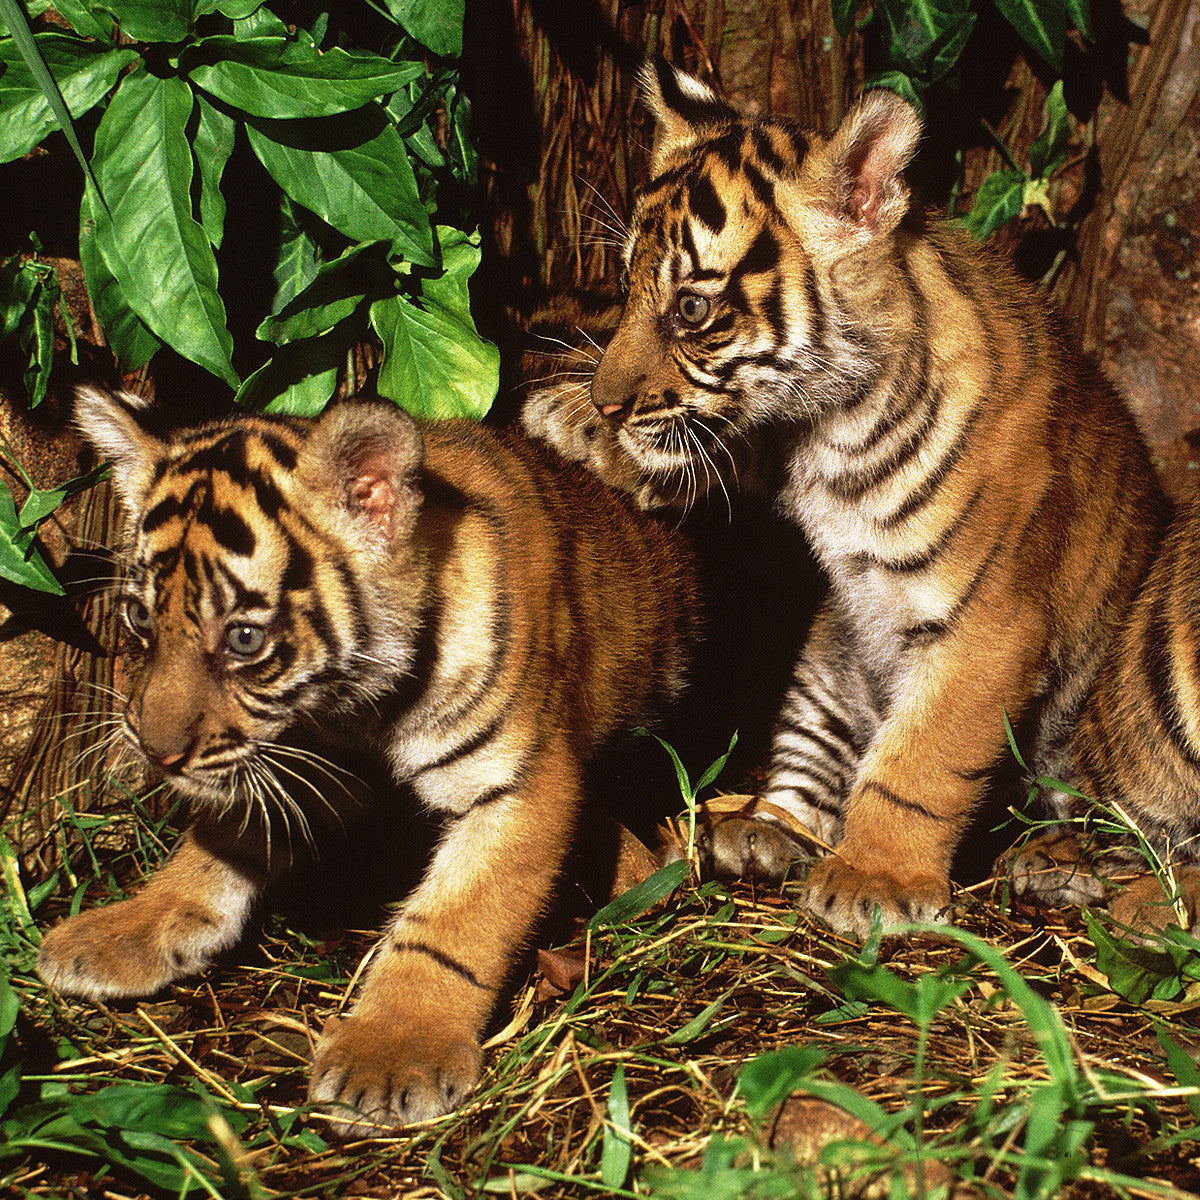 Two tiger cubs